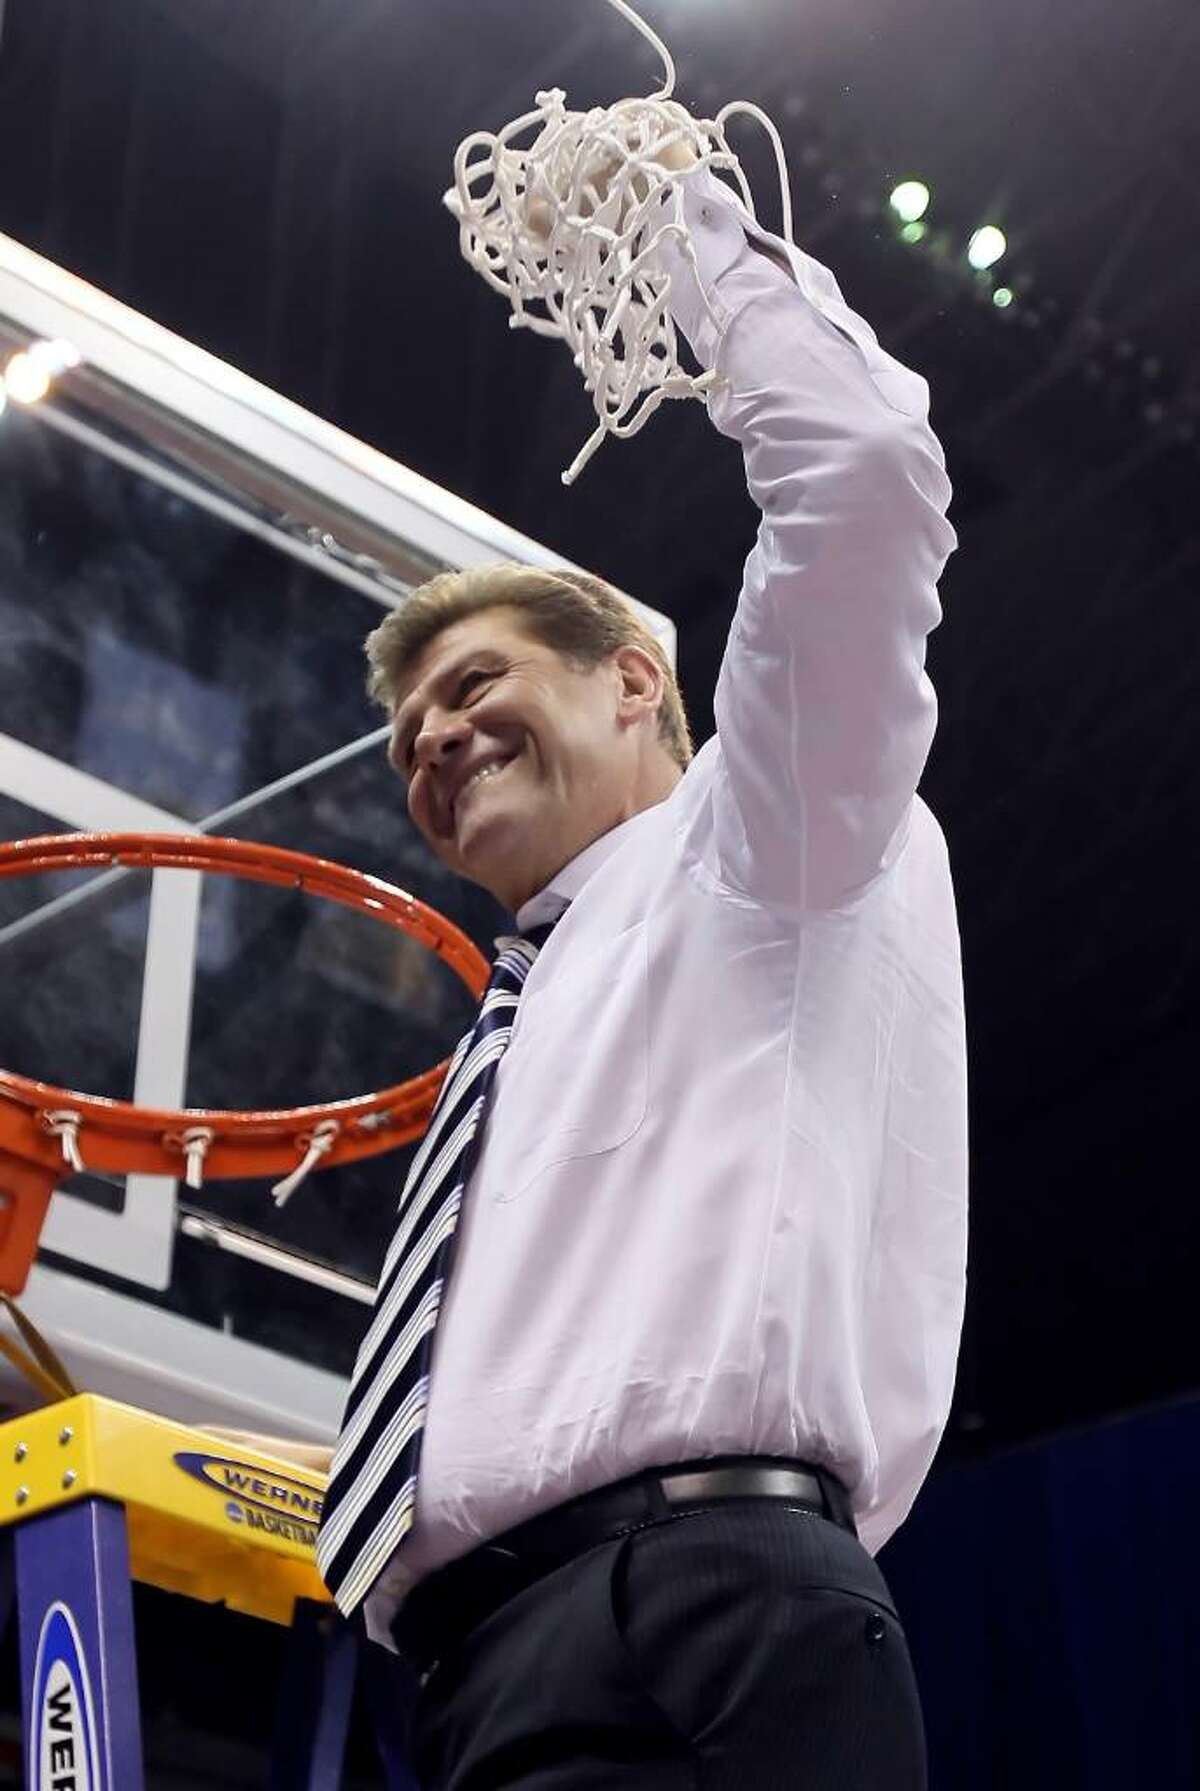 SAN ANTONIO - APRIL 06: Connecticut Huskies head coach Geno Auriemma celebrates his teams 53-47 win over the Stanford Cardinal by cutting down the net following the the NCAA Women's Final Four Championship game at the Alamodome on April 6, 2010 in San Antonio, Texas. (Photo by Jeff Gross/Getty Images) *** Local Caption *** Geno Auriemma